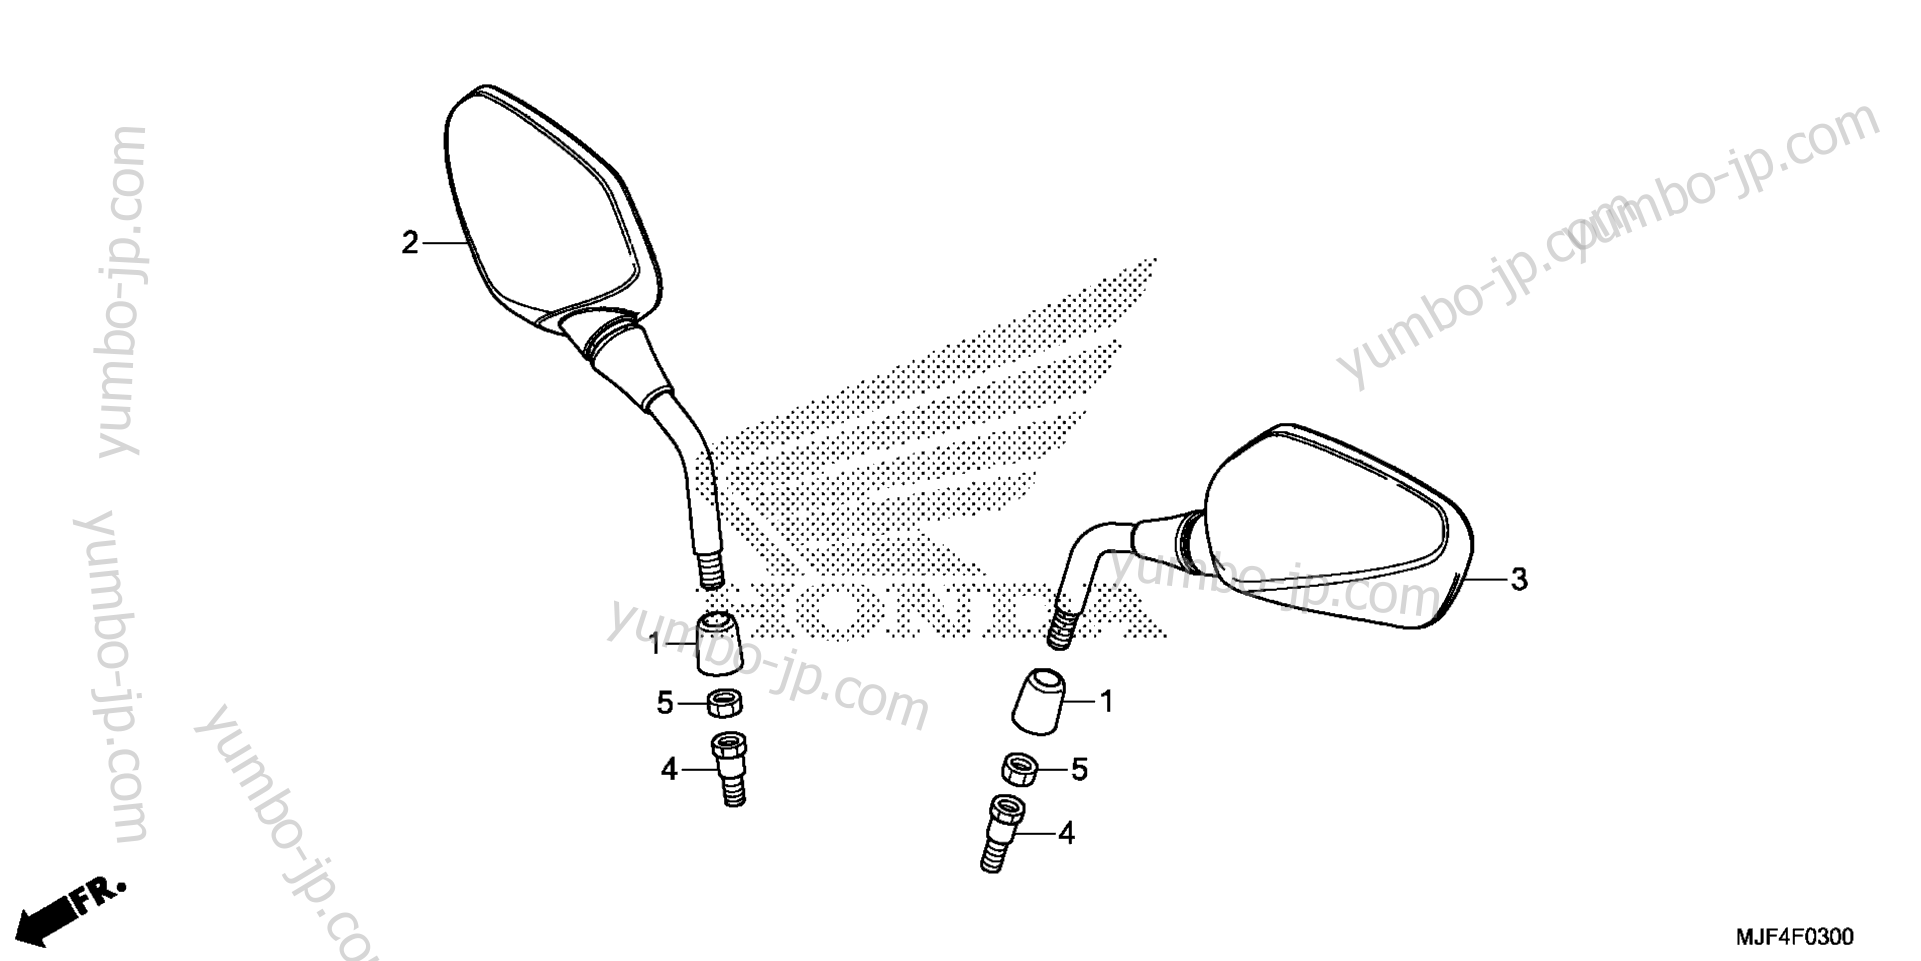 MIRROR for motorcycles HONDA CTX700N A 2014 year